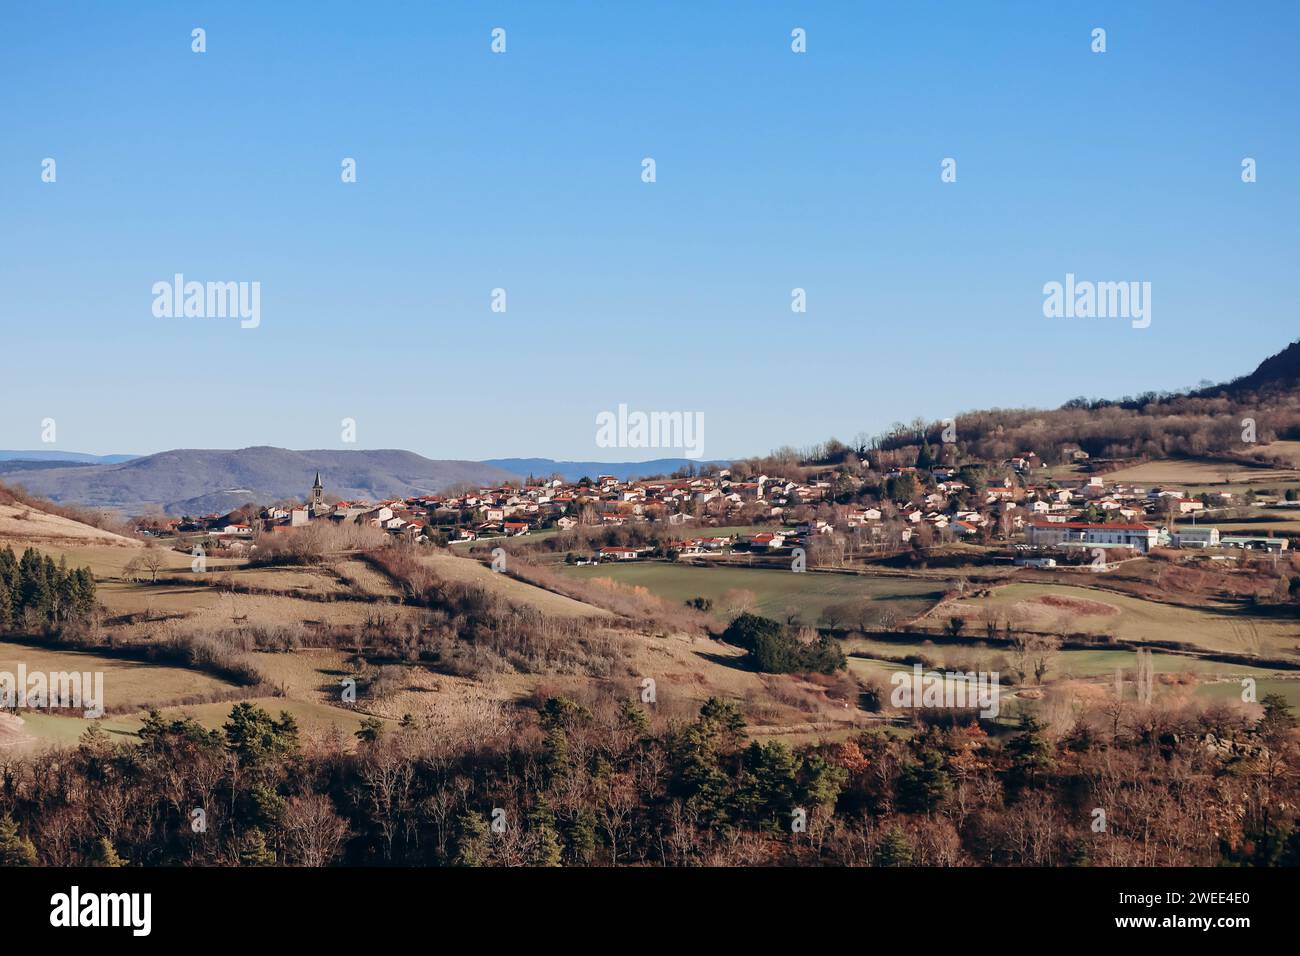 Small villages in the Auvergne region, France Stock Photo